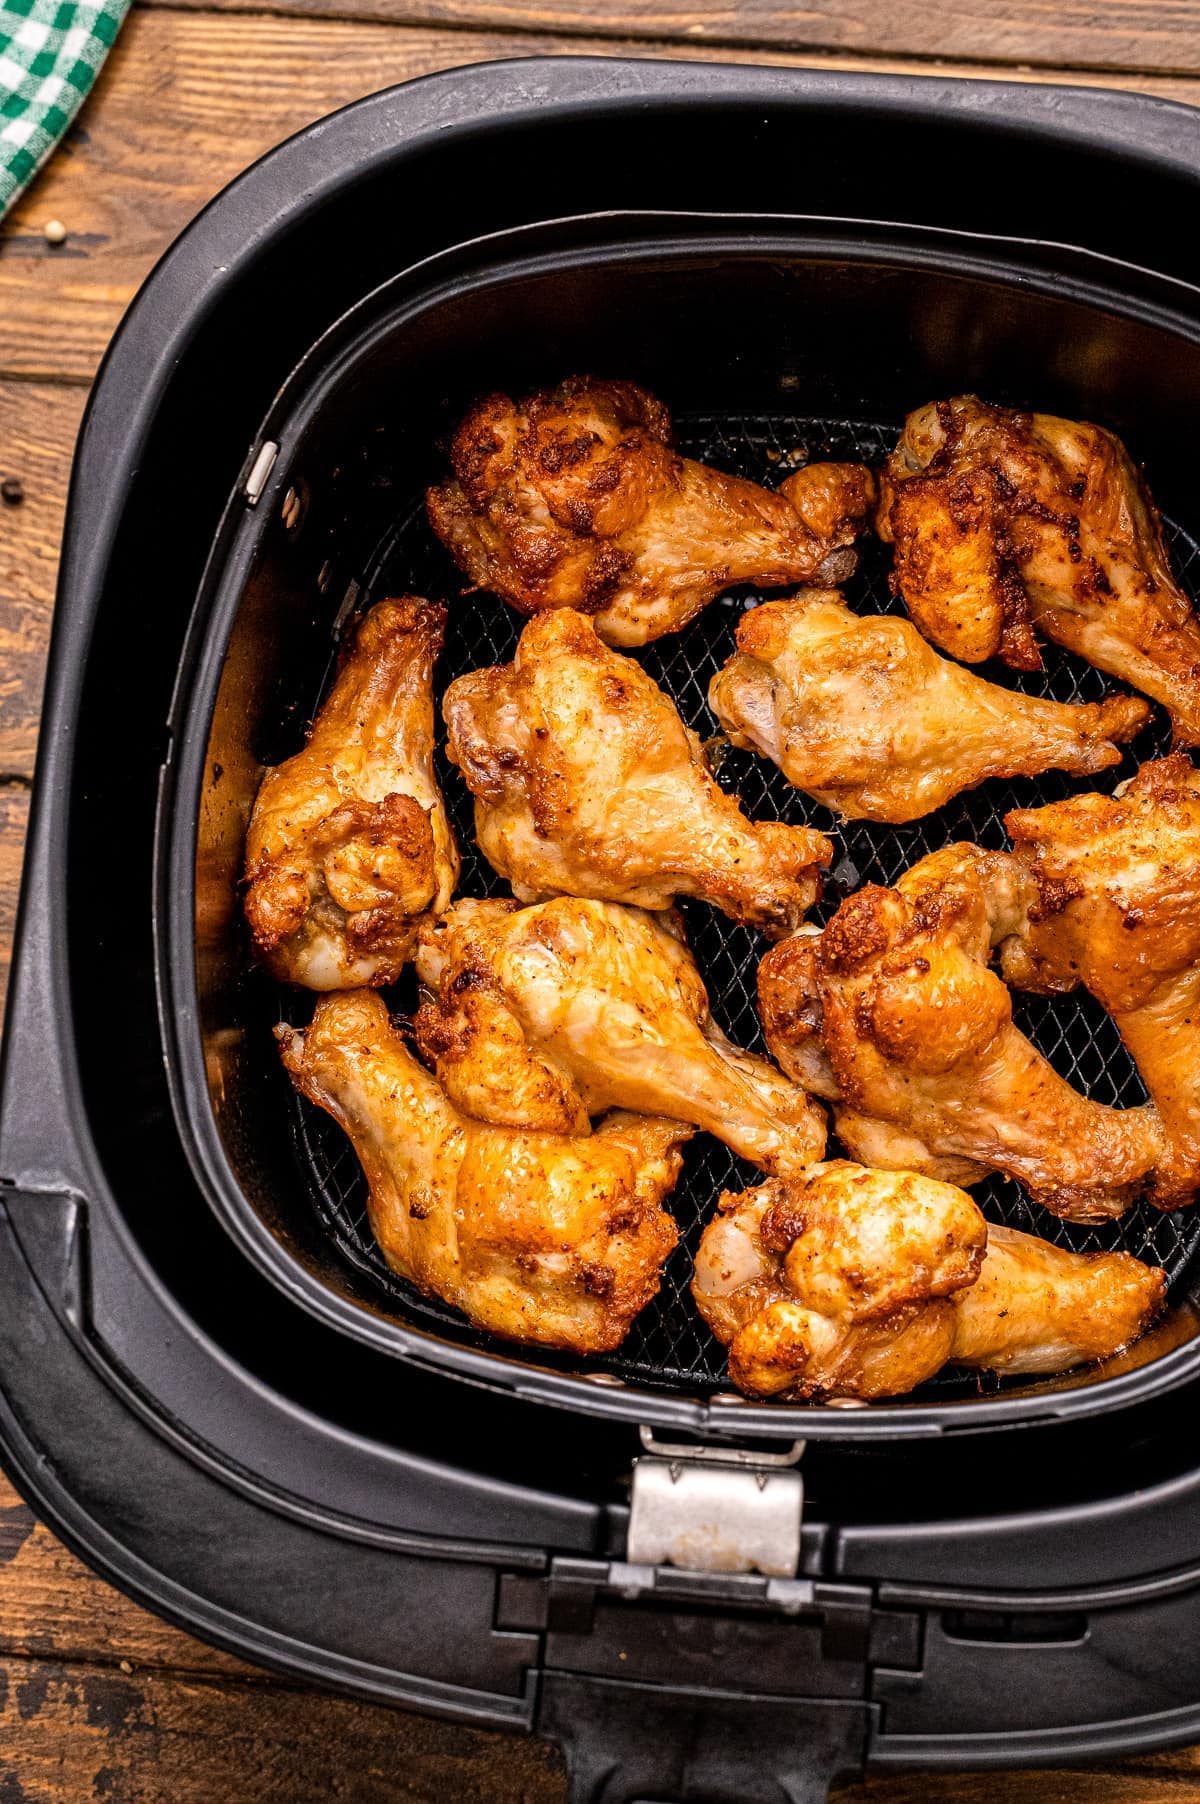 Air Fryer basket with cooked chicken wings in it.